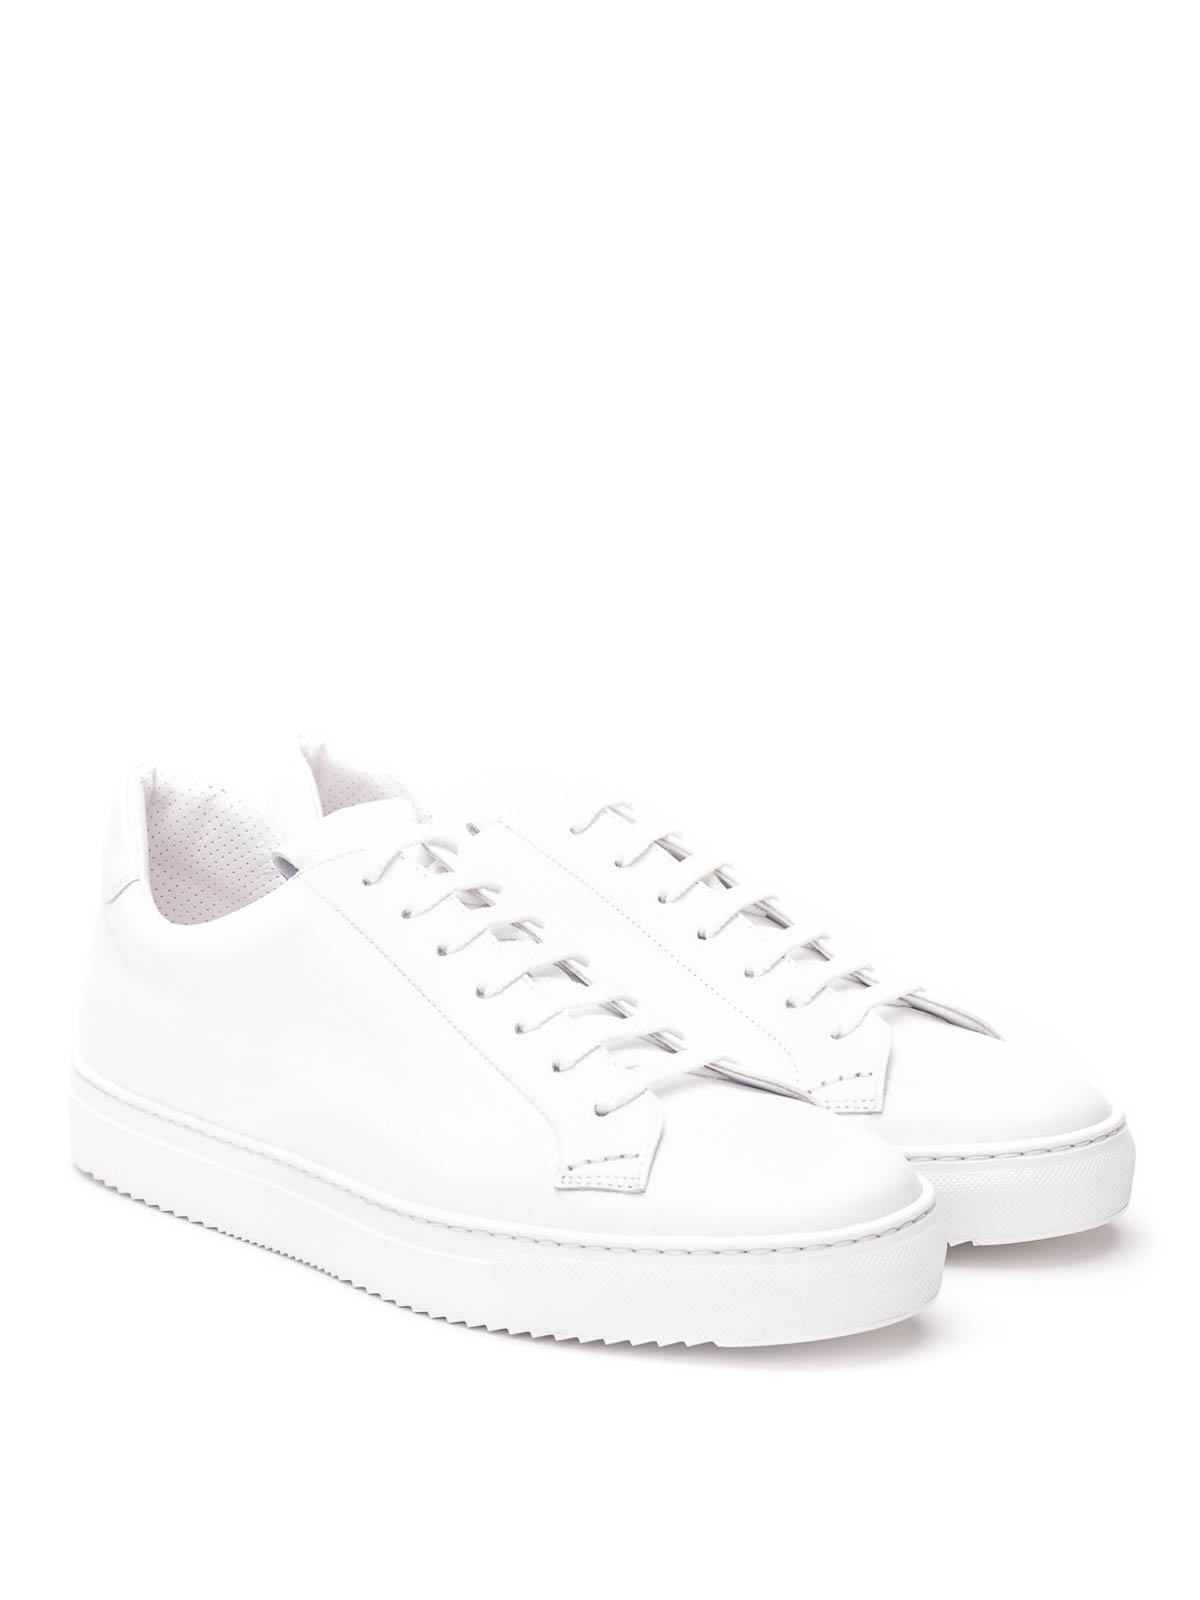 Doucal's - Sneakers bianche in pelle liscia - sneakers - DU1796ERICUV055IW00